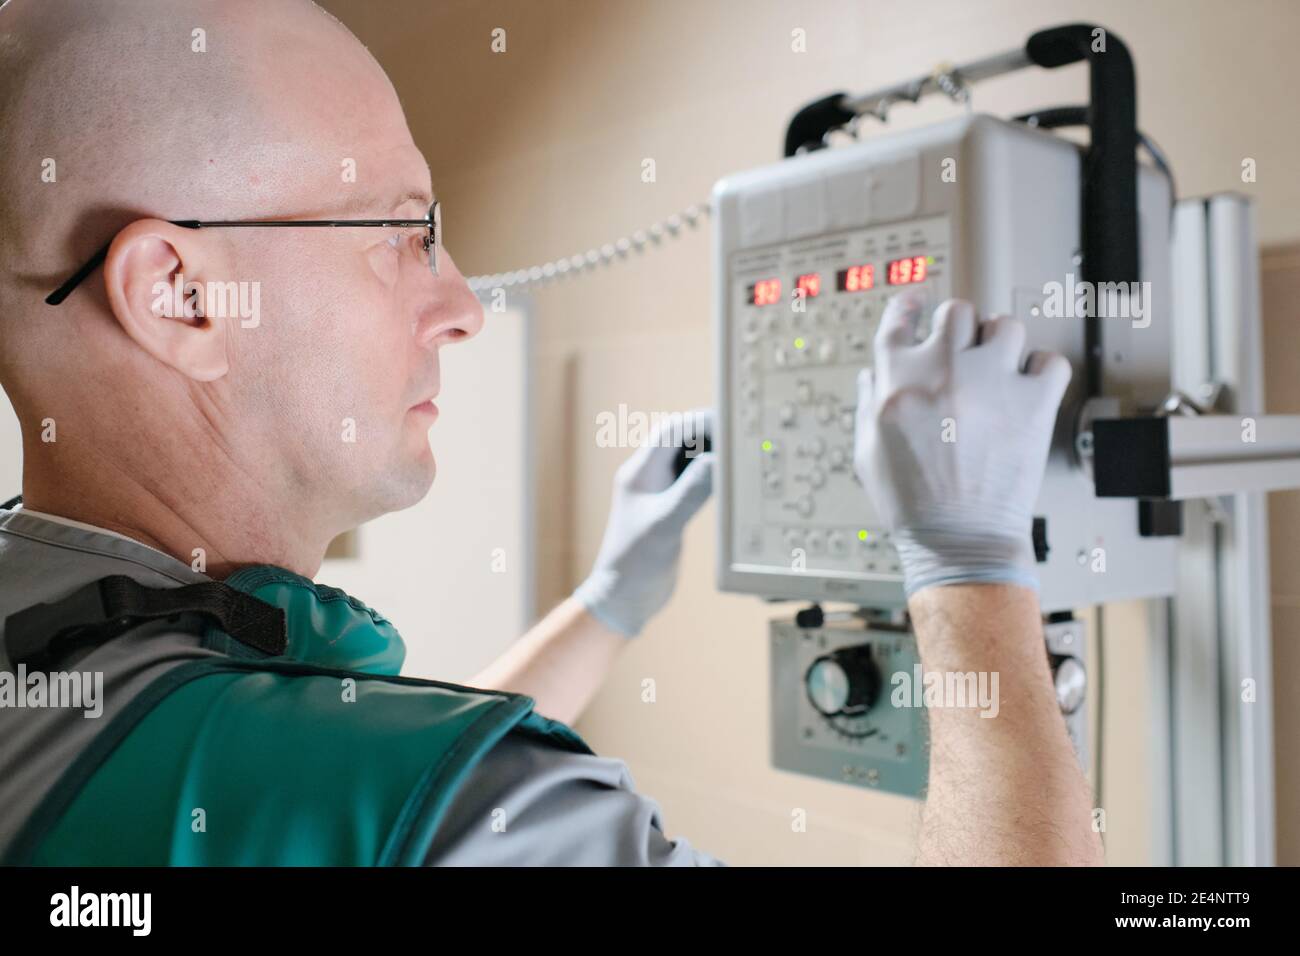 Serious mature doctor using x-ray equipment during his work at hospital Stock Photo